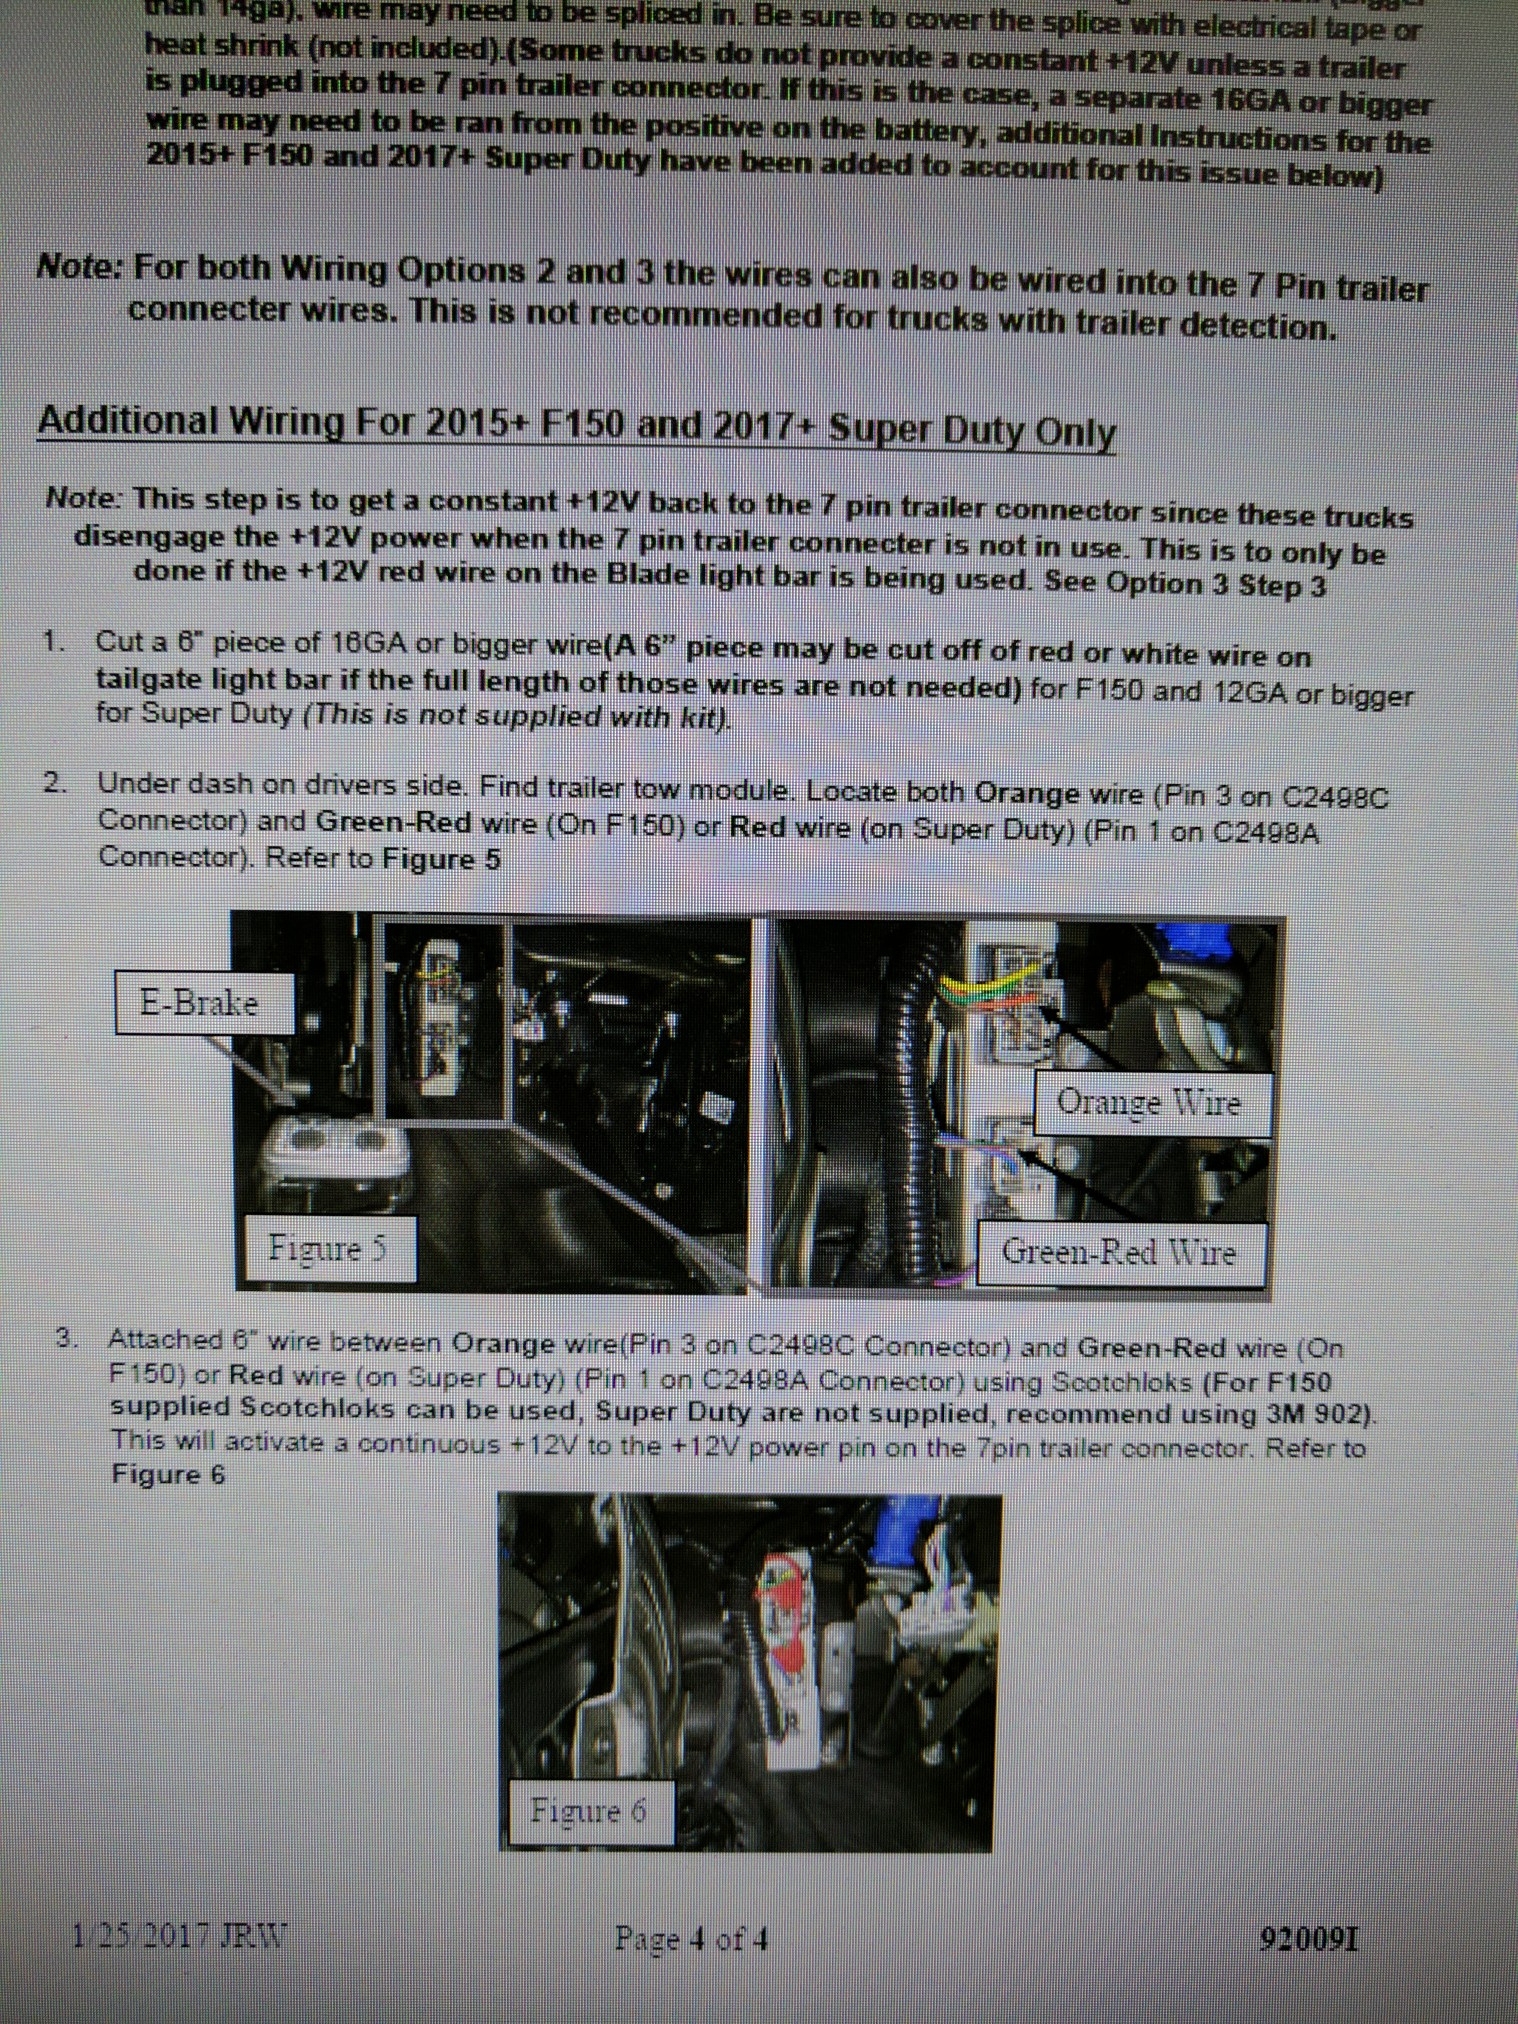 Wiring Diagram For 2015 Ford F150 For Light Bar from www.f150forum.com